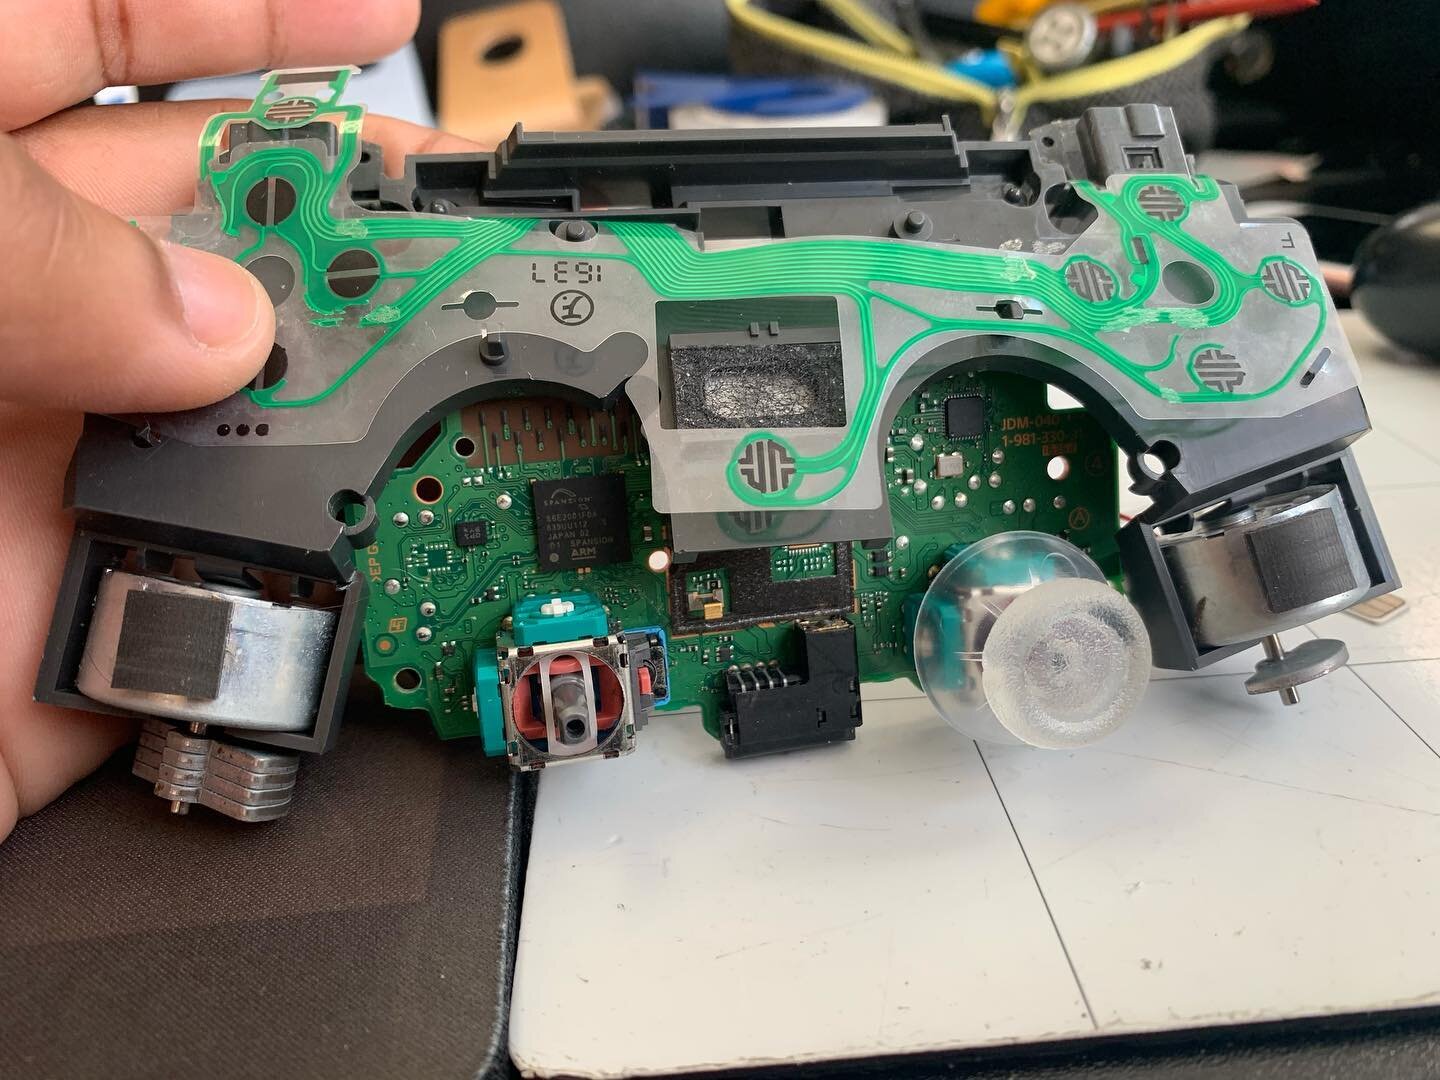 PS4 Controller repair. A few of the buttons stopped working altogether. Good as New. 📲Call, Text, or slide in our DMs to schedule an appointment. You have our permission. ⭐️⭐️⭐️⭐️⭐️⠀⠀⠀⠀⠀⠀⠀⠀⠀⠀⠀⠀⠀⠀⠀⠀⠀⠀ ⠀⠀⠀⠀⠀⠀⠀⠀⠀⠀⠀⠀⠀⠀⠀⠀⠀⠀
💻 EzekielTech
📲: (845) 857-5